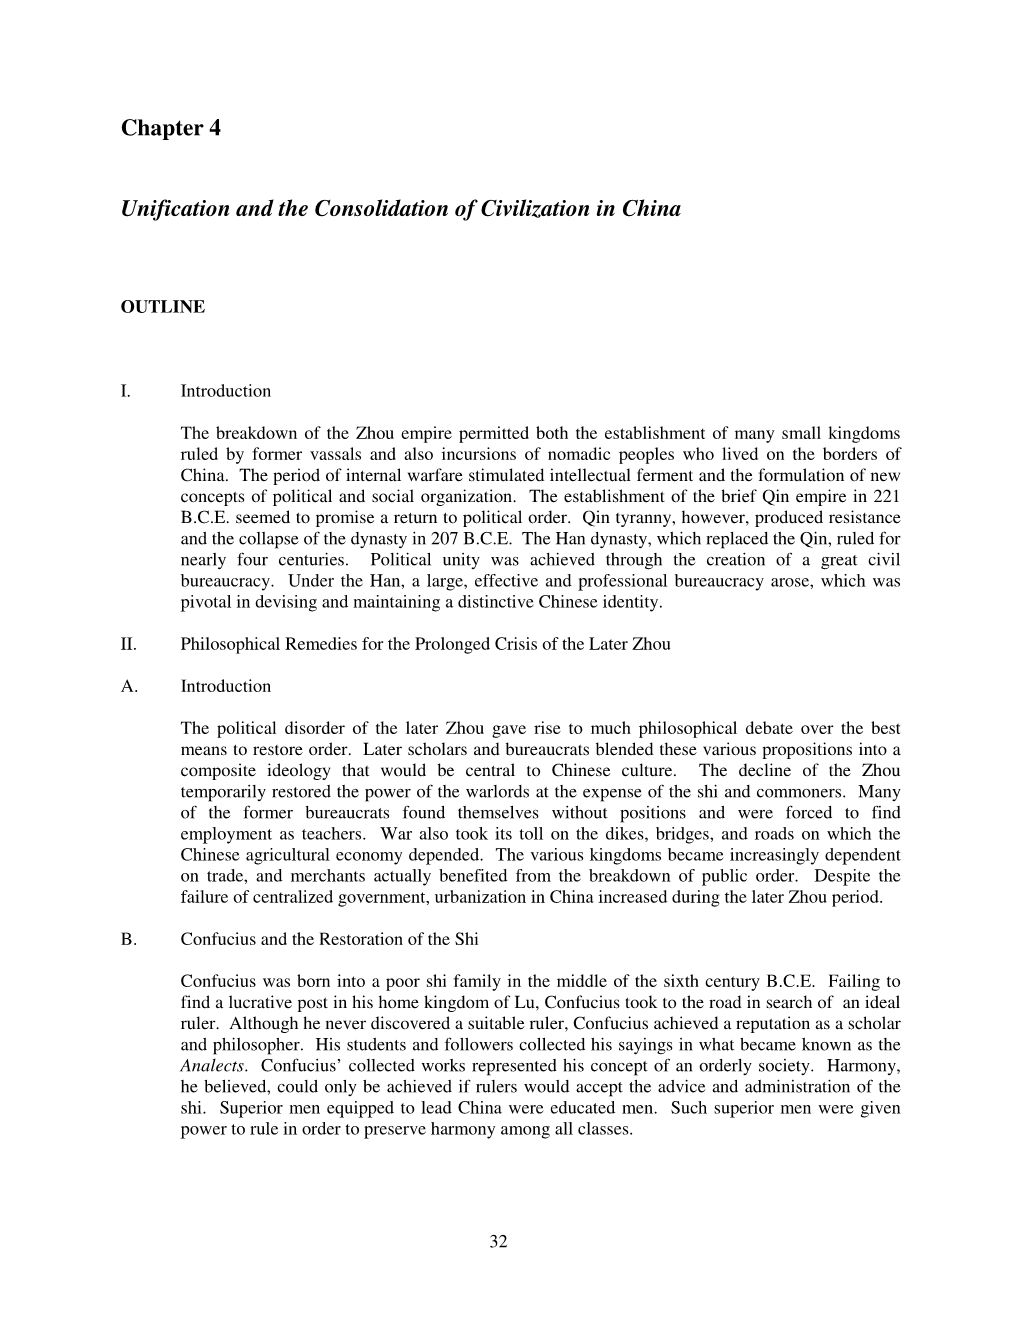 Chapter 4 Unification and the Consolidation of Civilization in China